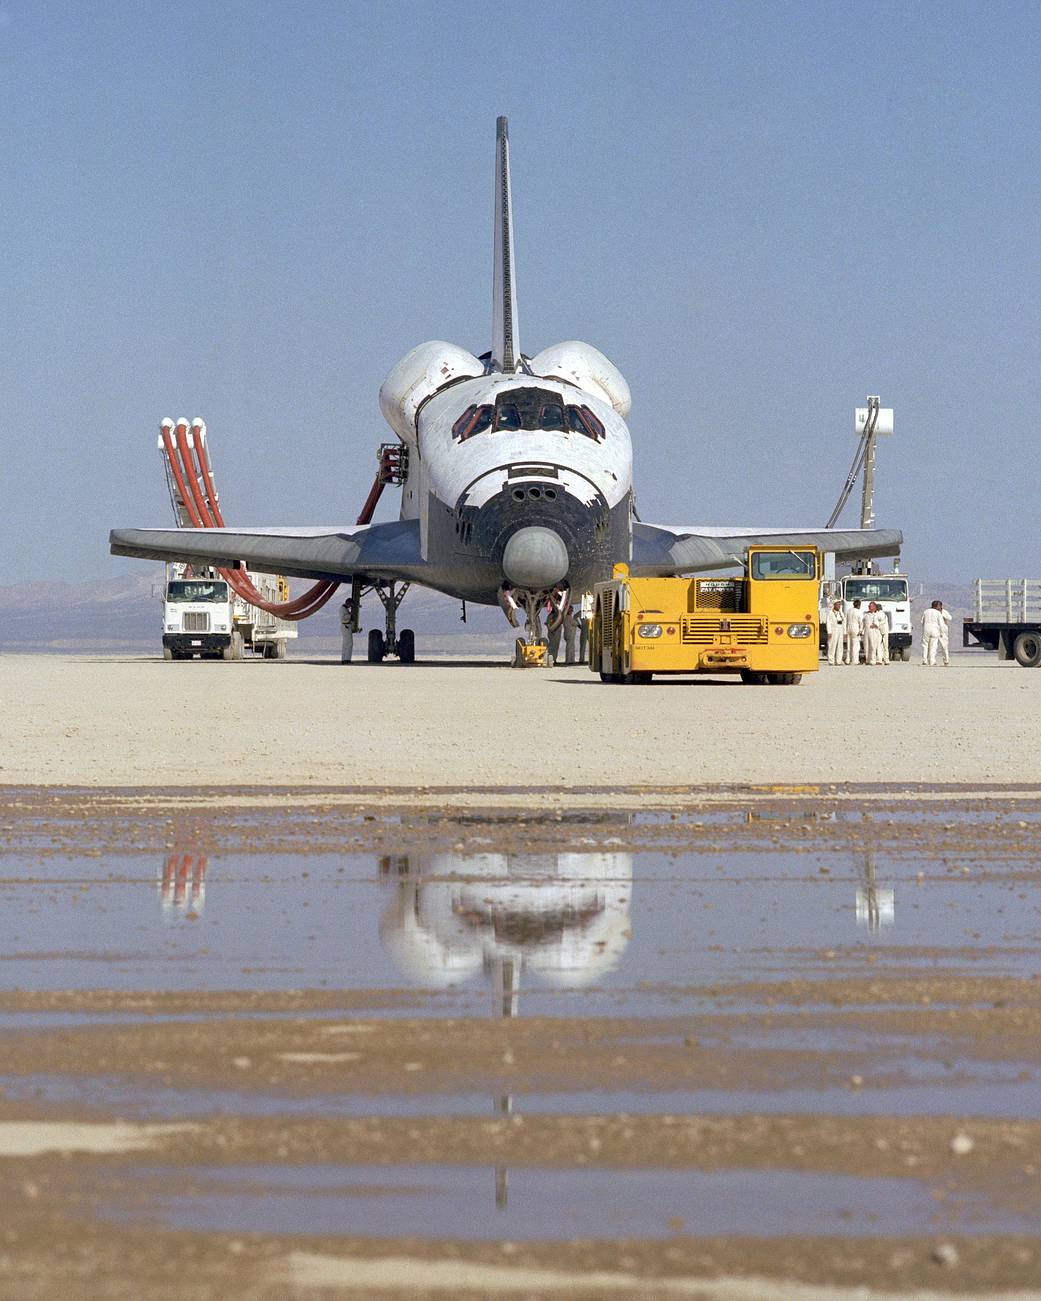 STS-1 Space Shuttle Columbia on Rogers Dry Lakebed at Edwards AFB